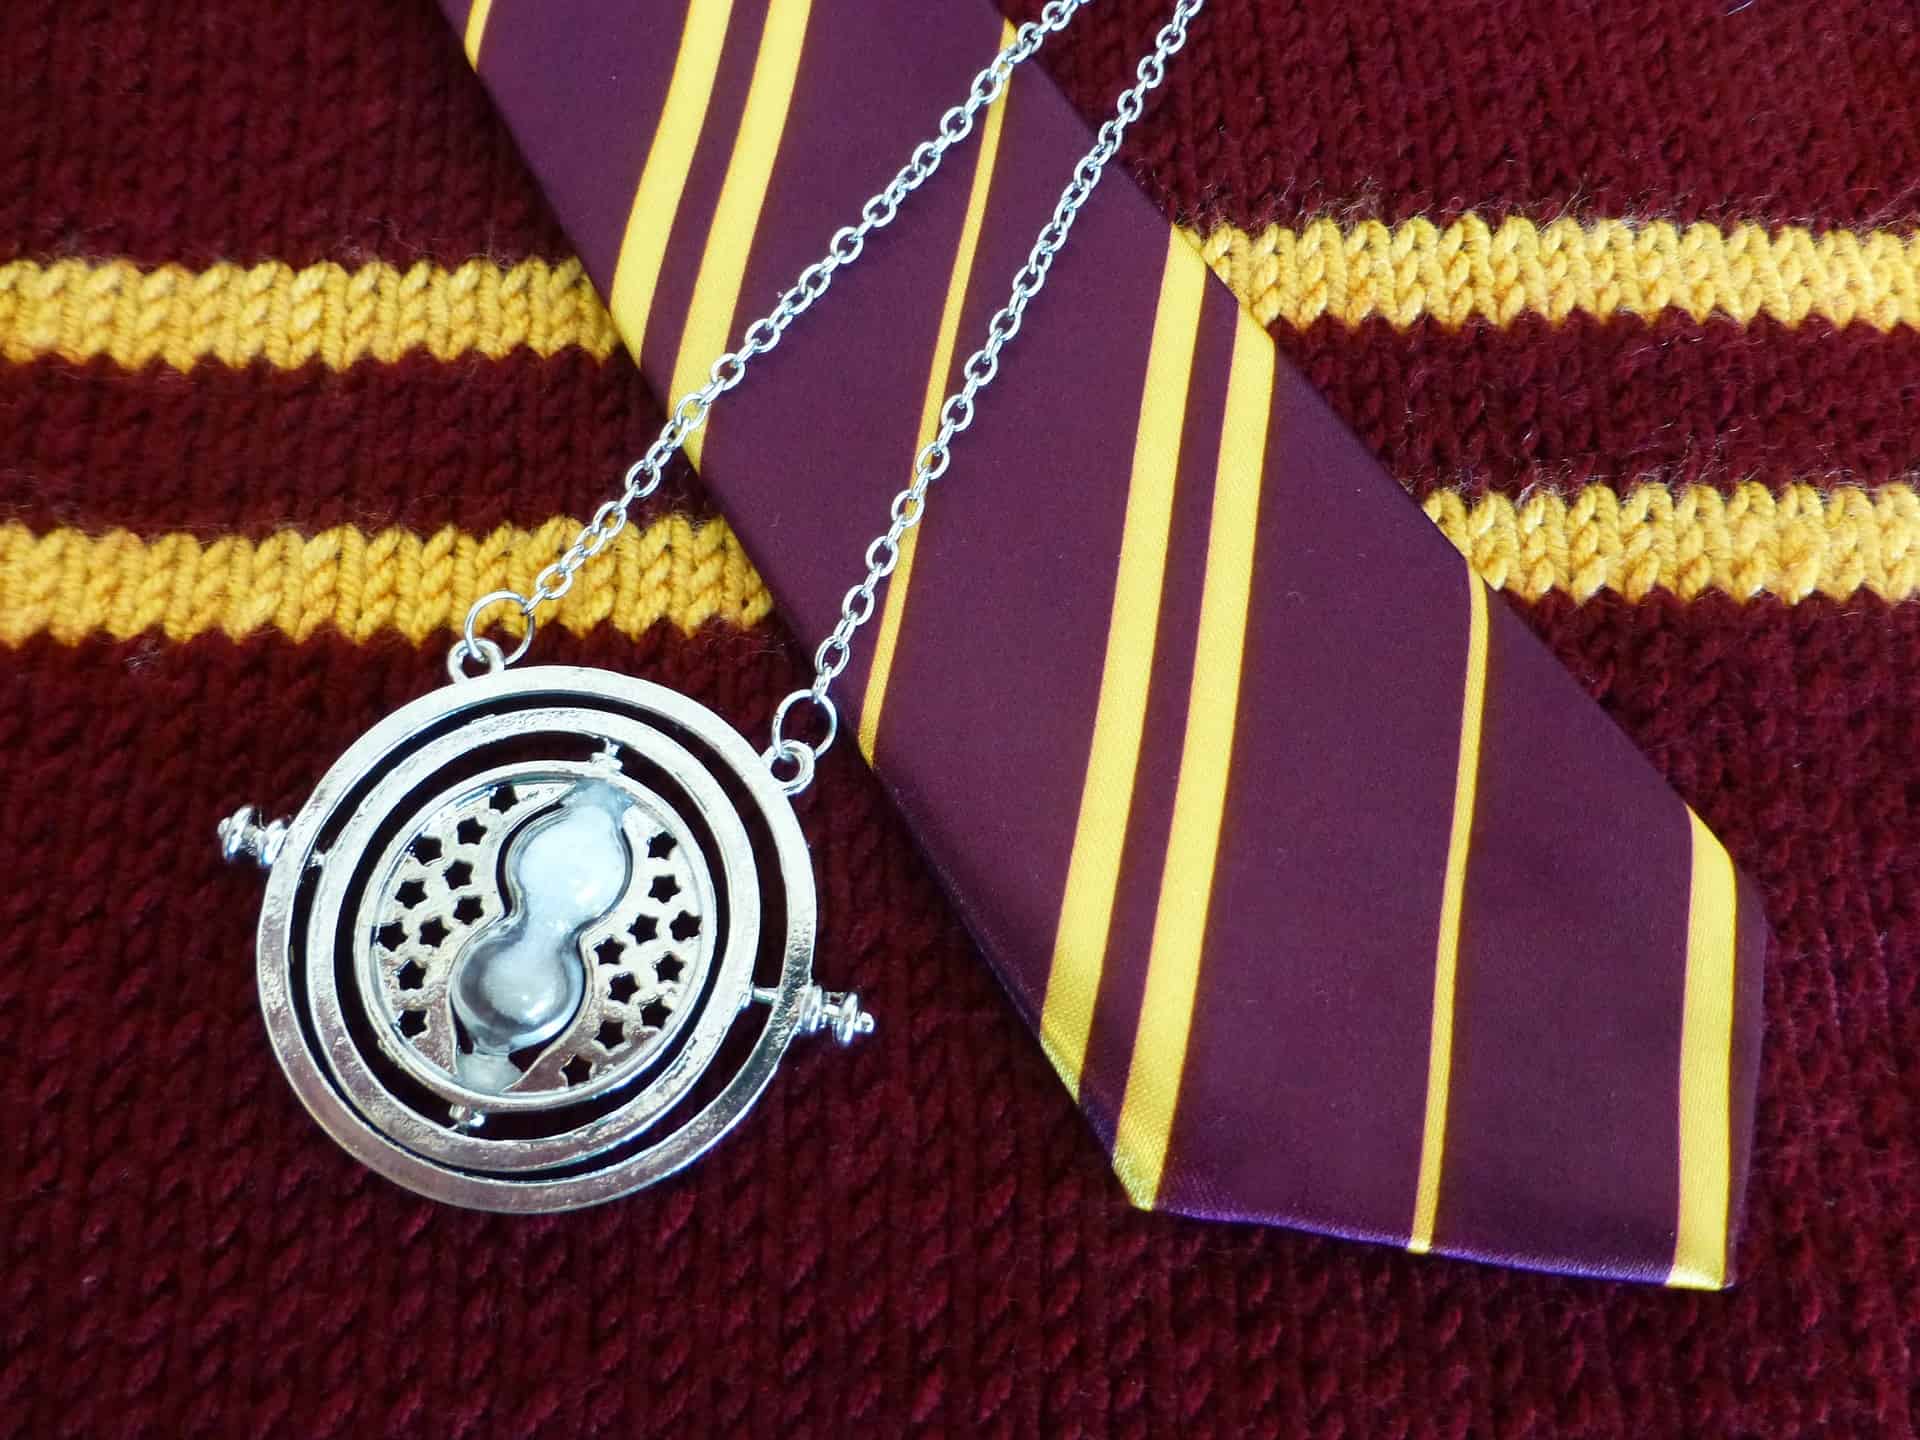 Harry Potter tie and jewelry